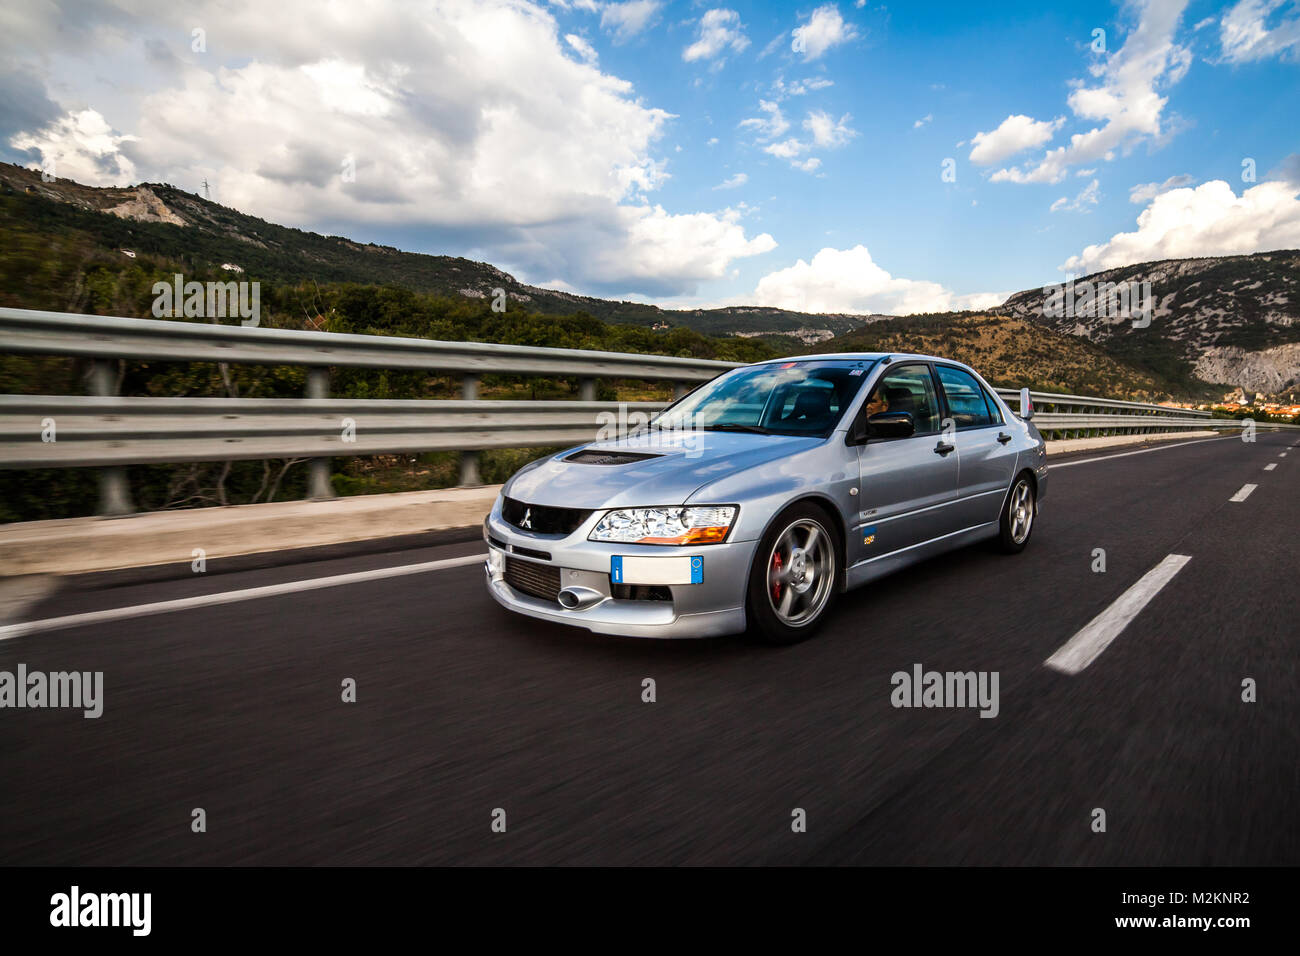 Trieste, Italy - SEPTEMBER 3, 2013: Photo of Mitsubishi EVO 8 .The Lancer Evolution 8 sedan features a newly designed 4B11T 2.0L (1998cc) turbocharged Stock Photo